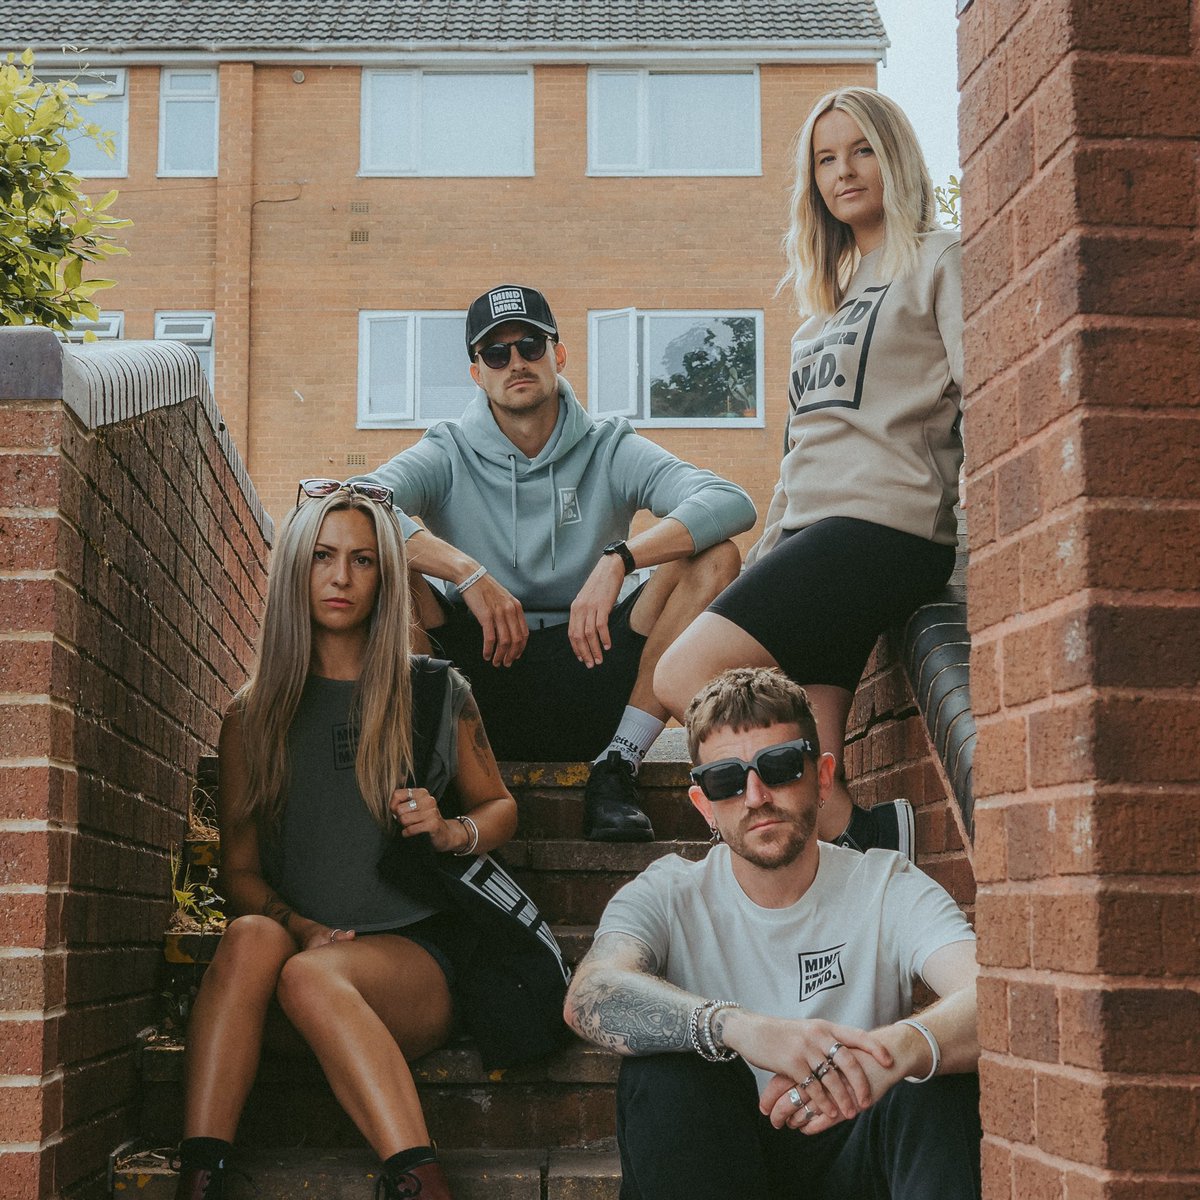 GLOBAL MND AWARENESS DAY 🌎📢 …and what better way to raise awareness than repping our exclusive #MerchWithMeaning apparel, OUT NOW! Head over to mindovermnd.co.uk to find out about our project and get your hands on your very own MND merch 🖤🤙 look good - do good!